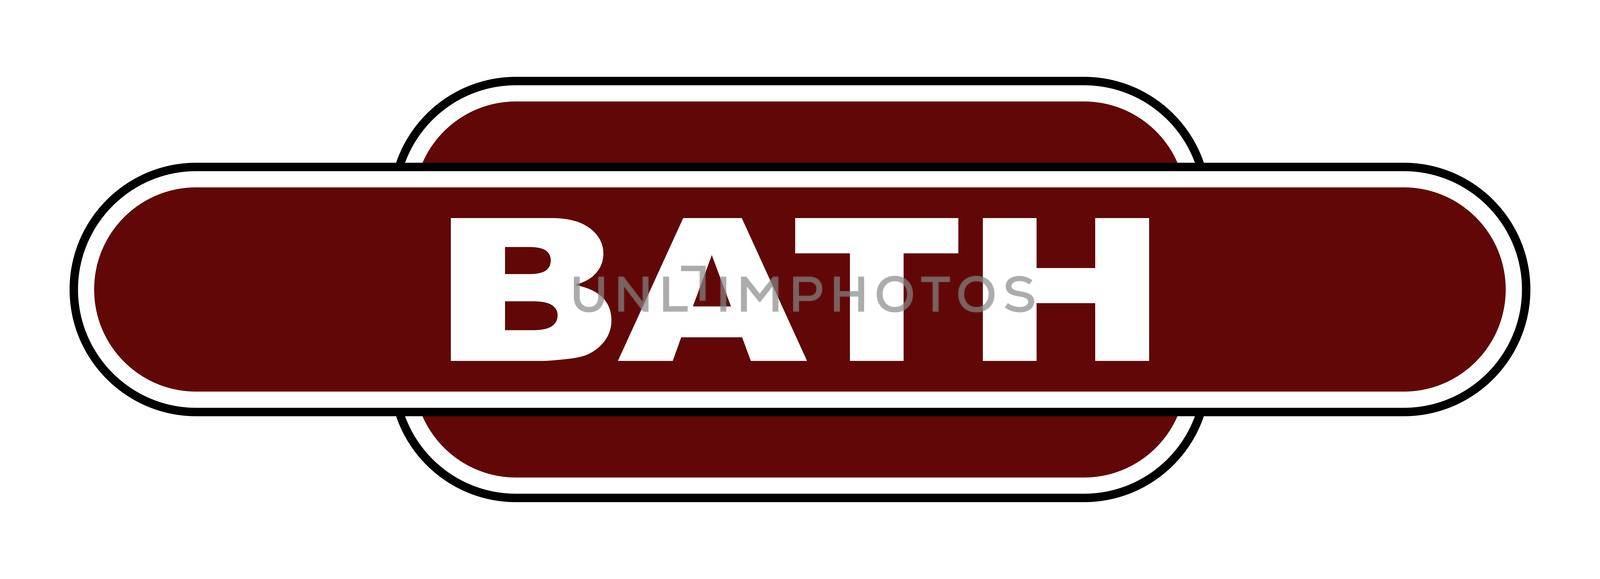 A BATH UK station name plate over a white background